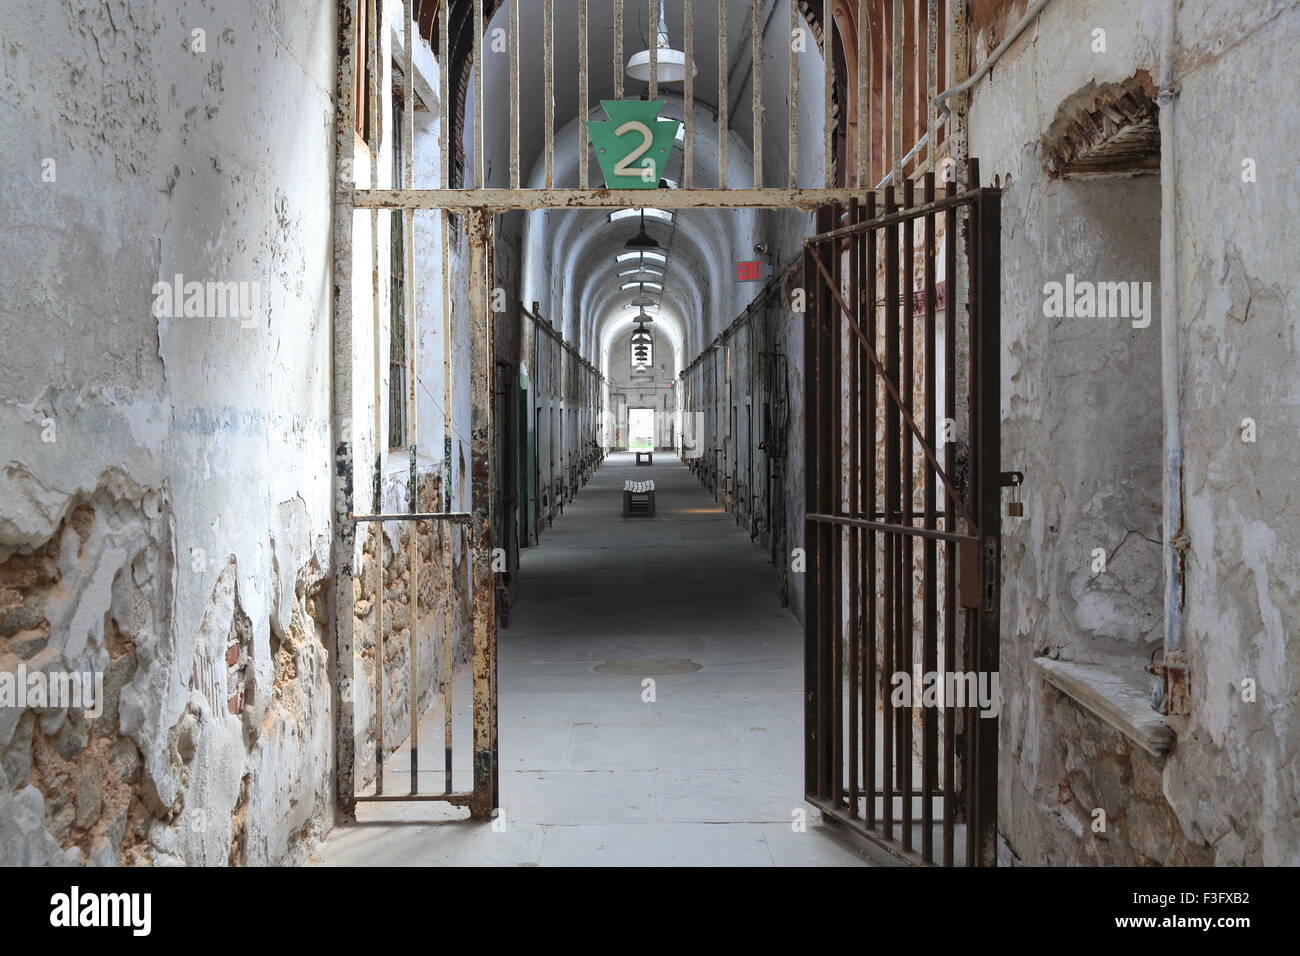 The decrepid cell blocks of the Eastern State Penitentiary, built in 1829, now a tourist attraction, in Philadelphia, USA Stock Photo